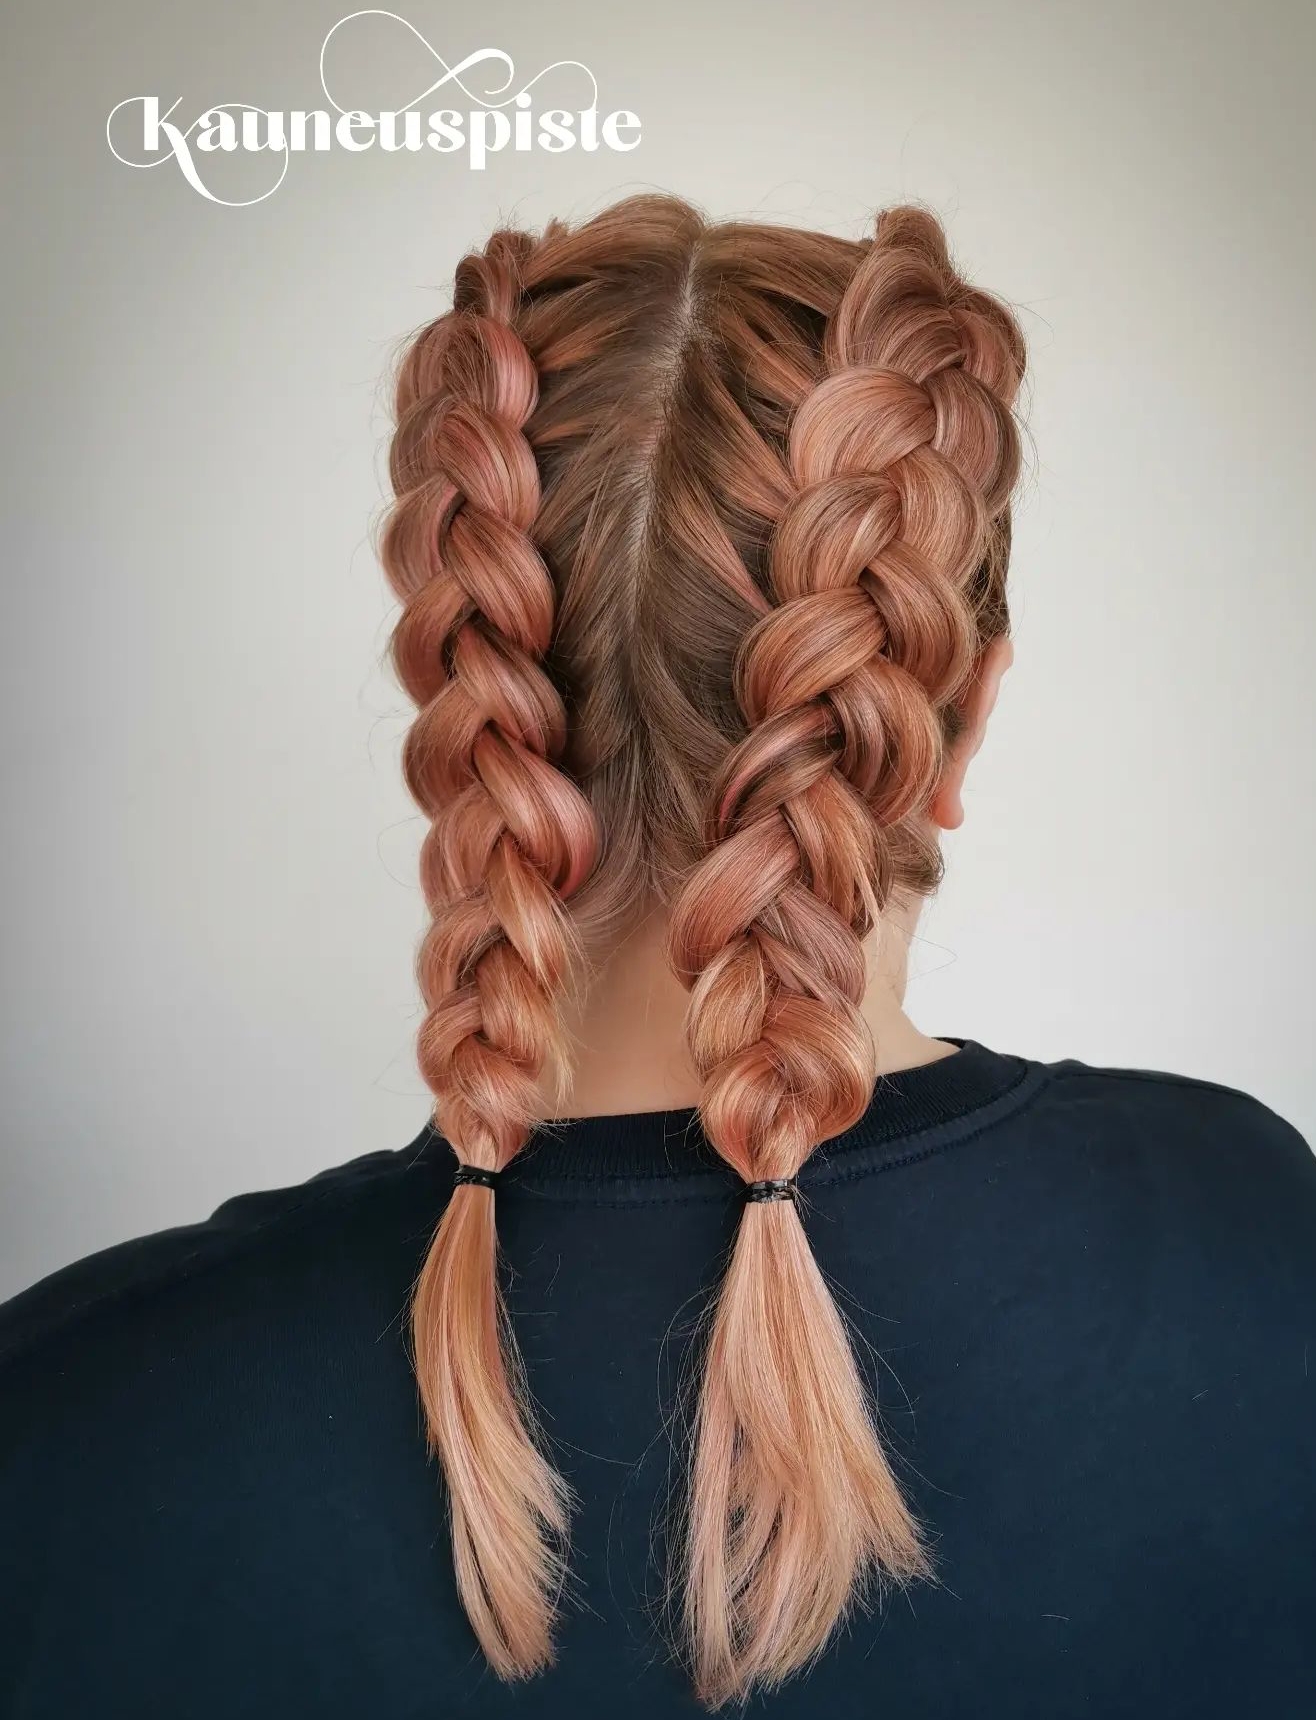 Braided Rose Gold Hairstyle